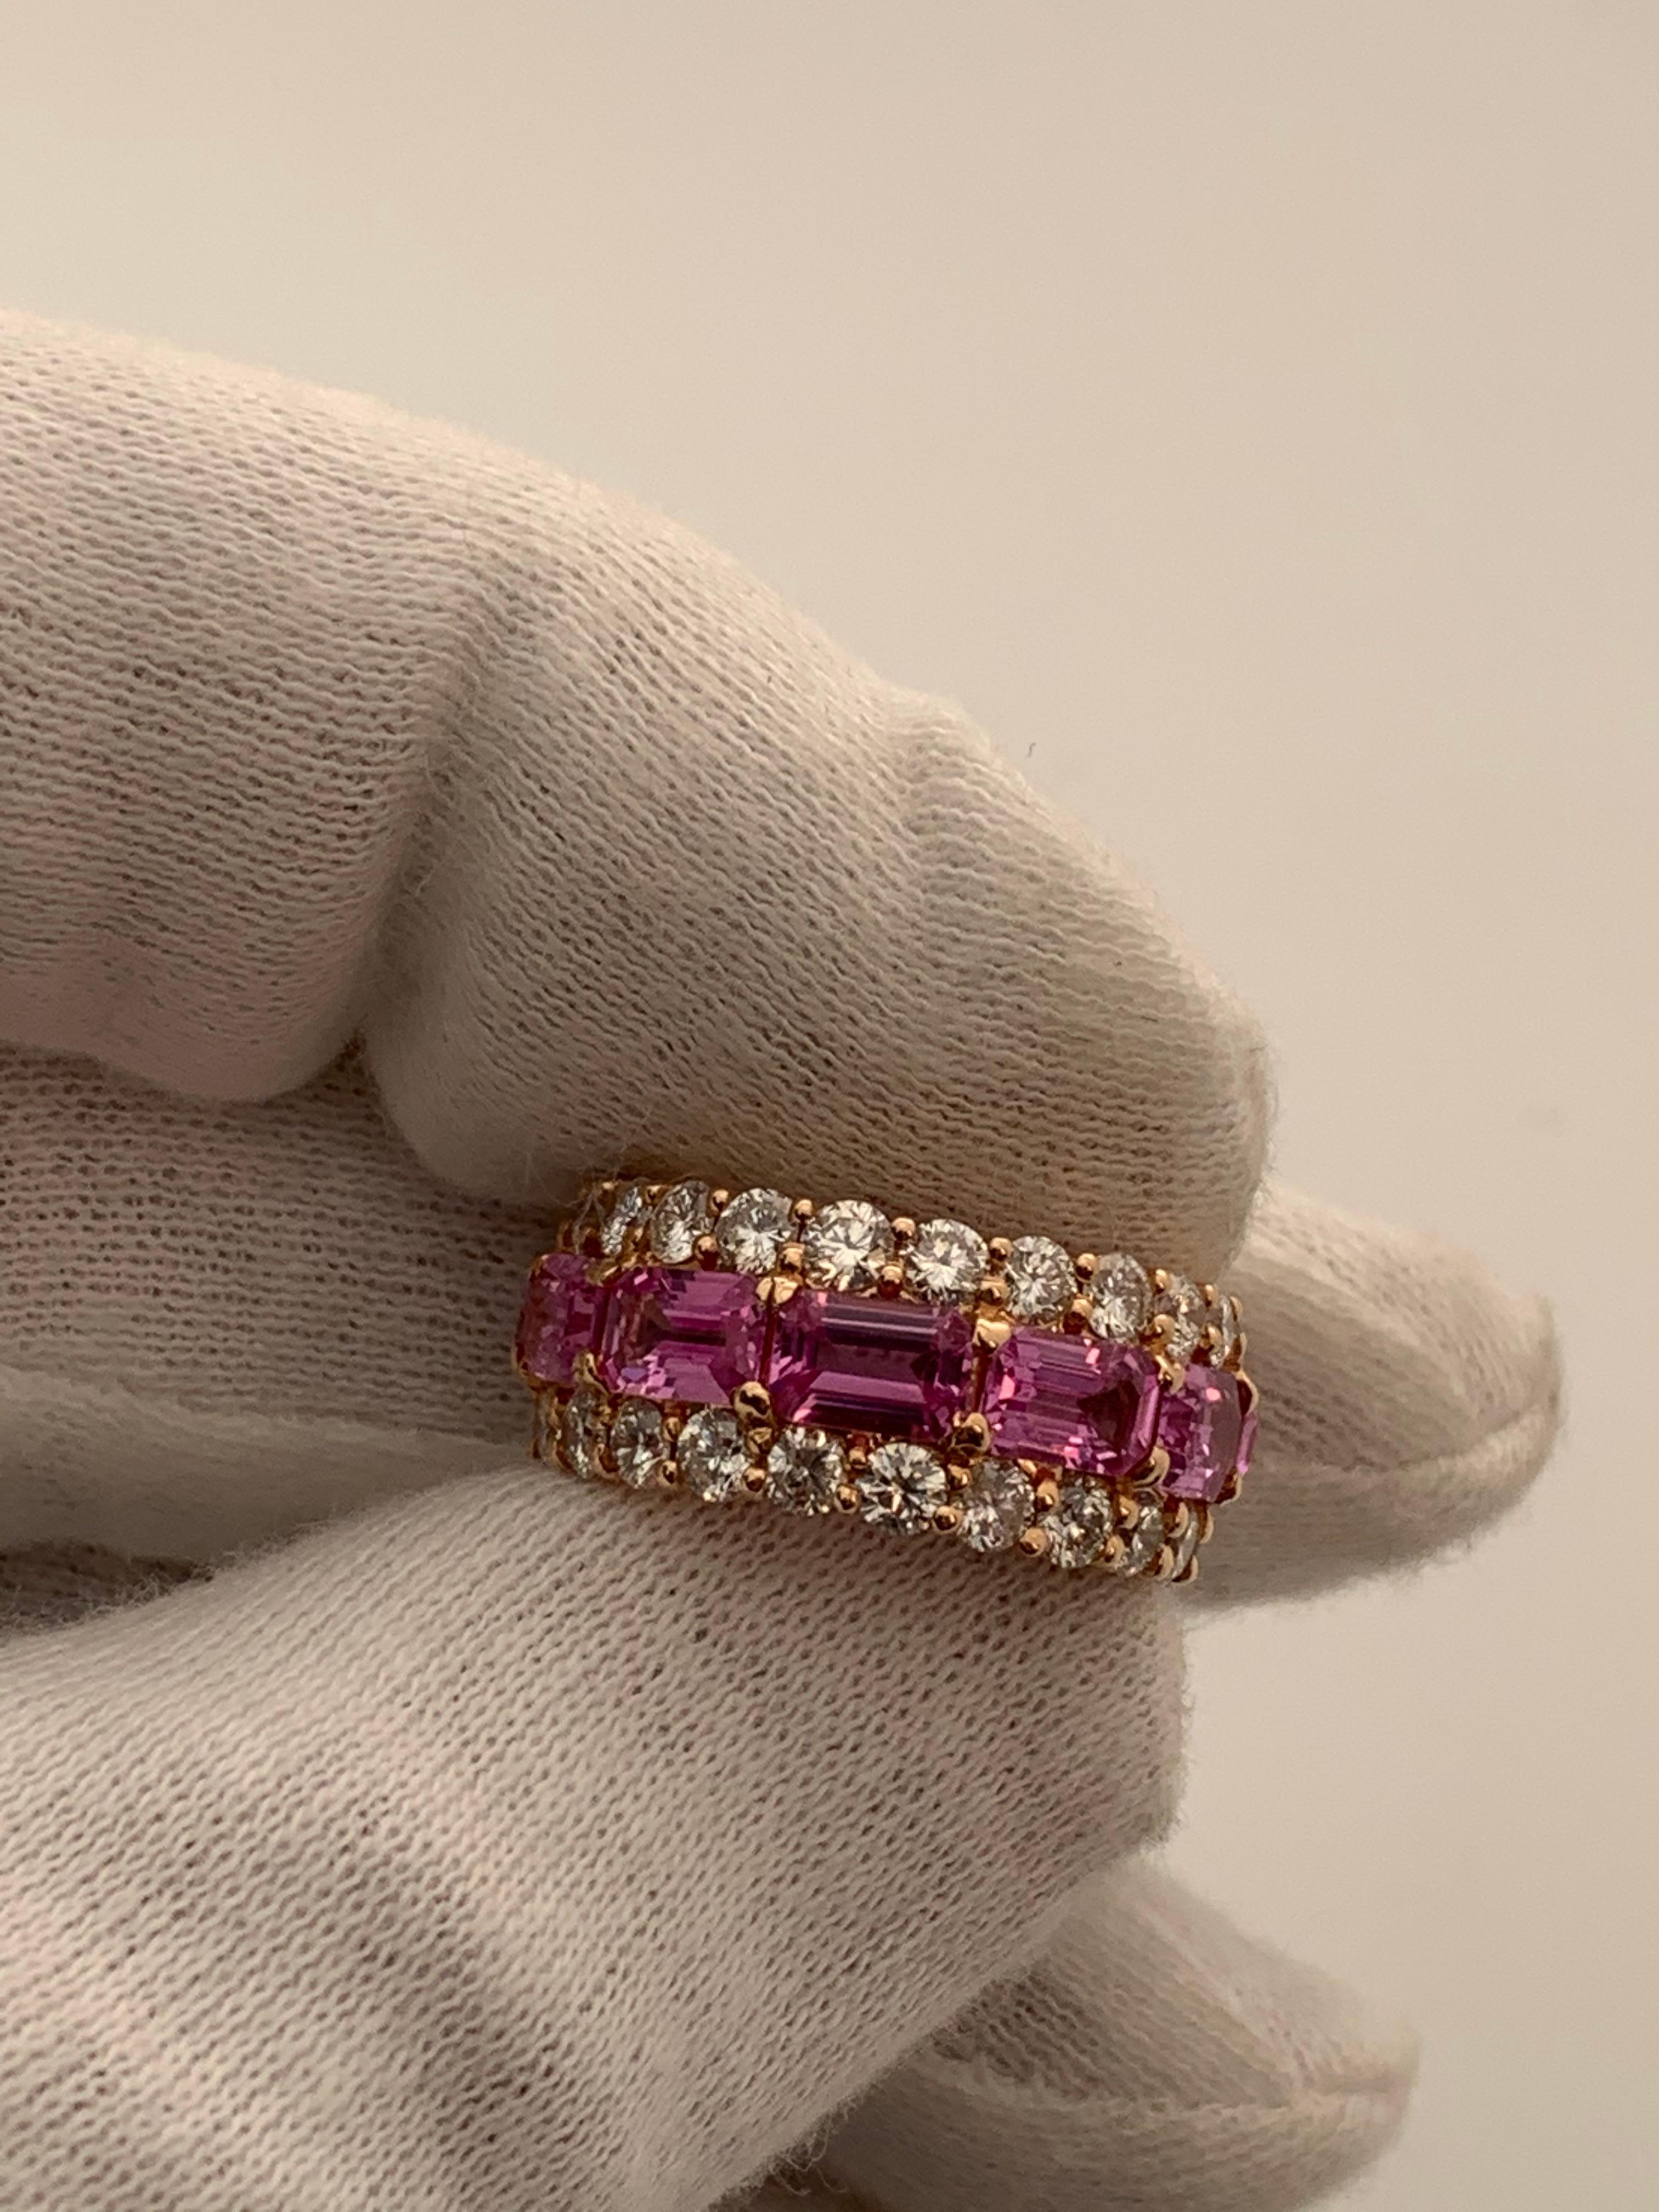 This beautiful Ring features 1 center row of Emerald Cut Pink Sapphires set East West with 1 row on both sides of Round Brilliant Diamonds.
11 Pink Sapphires weighing 7.34 Carats.
44 Round Diamonds weighing 3.45 Carats.
10.79 Carats in Total.
Set in